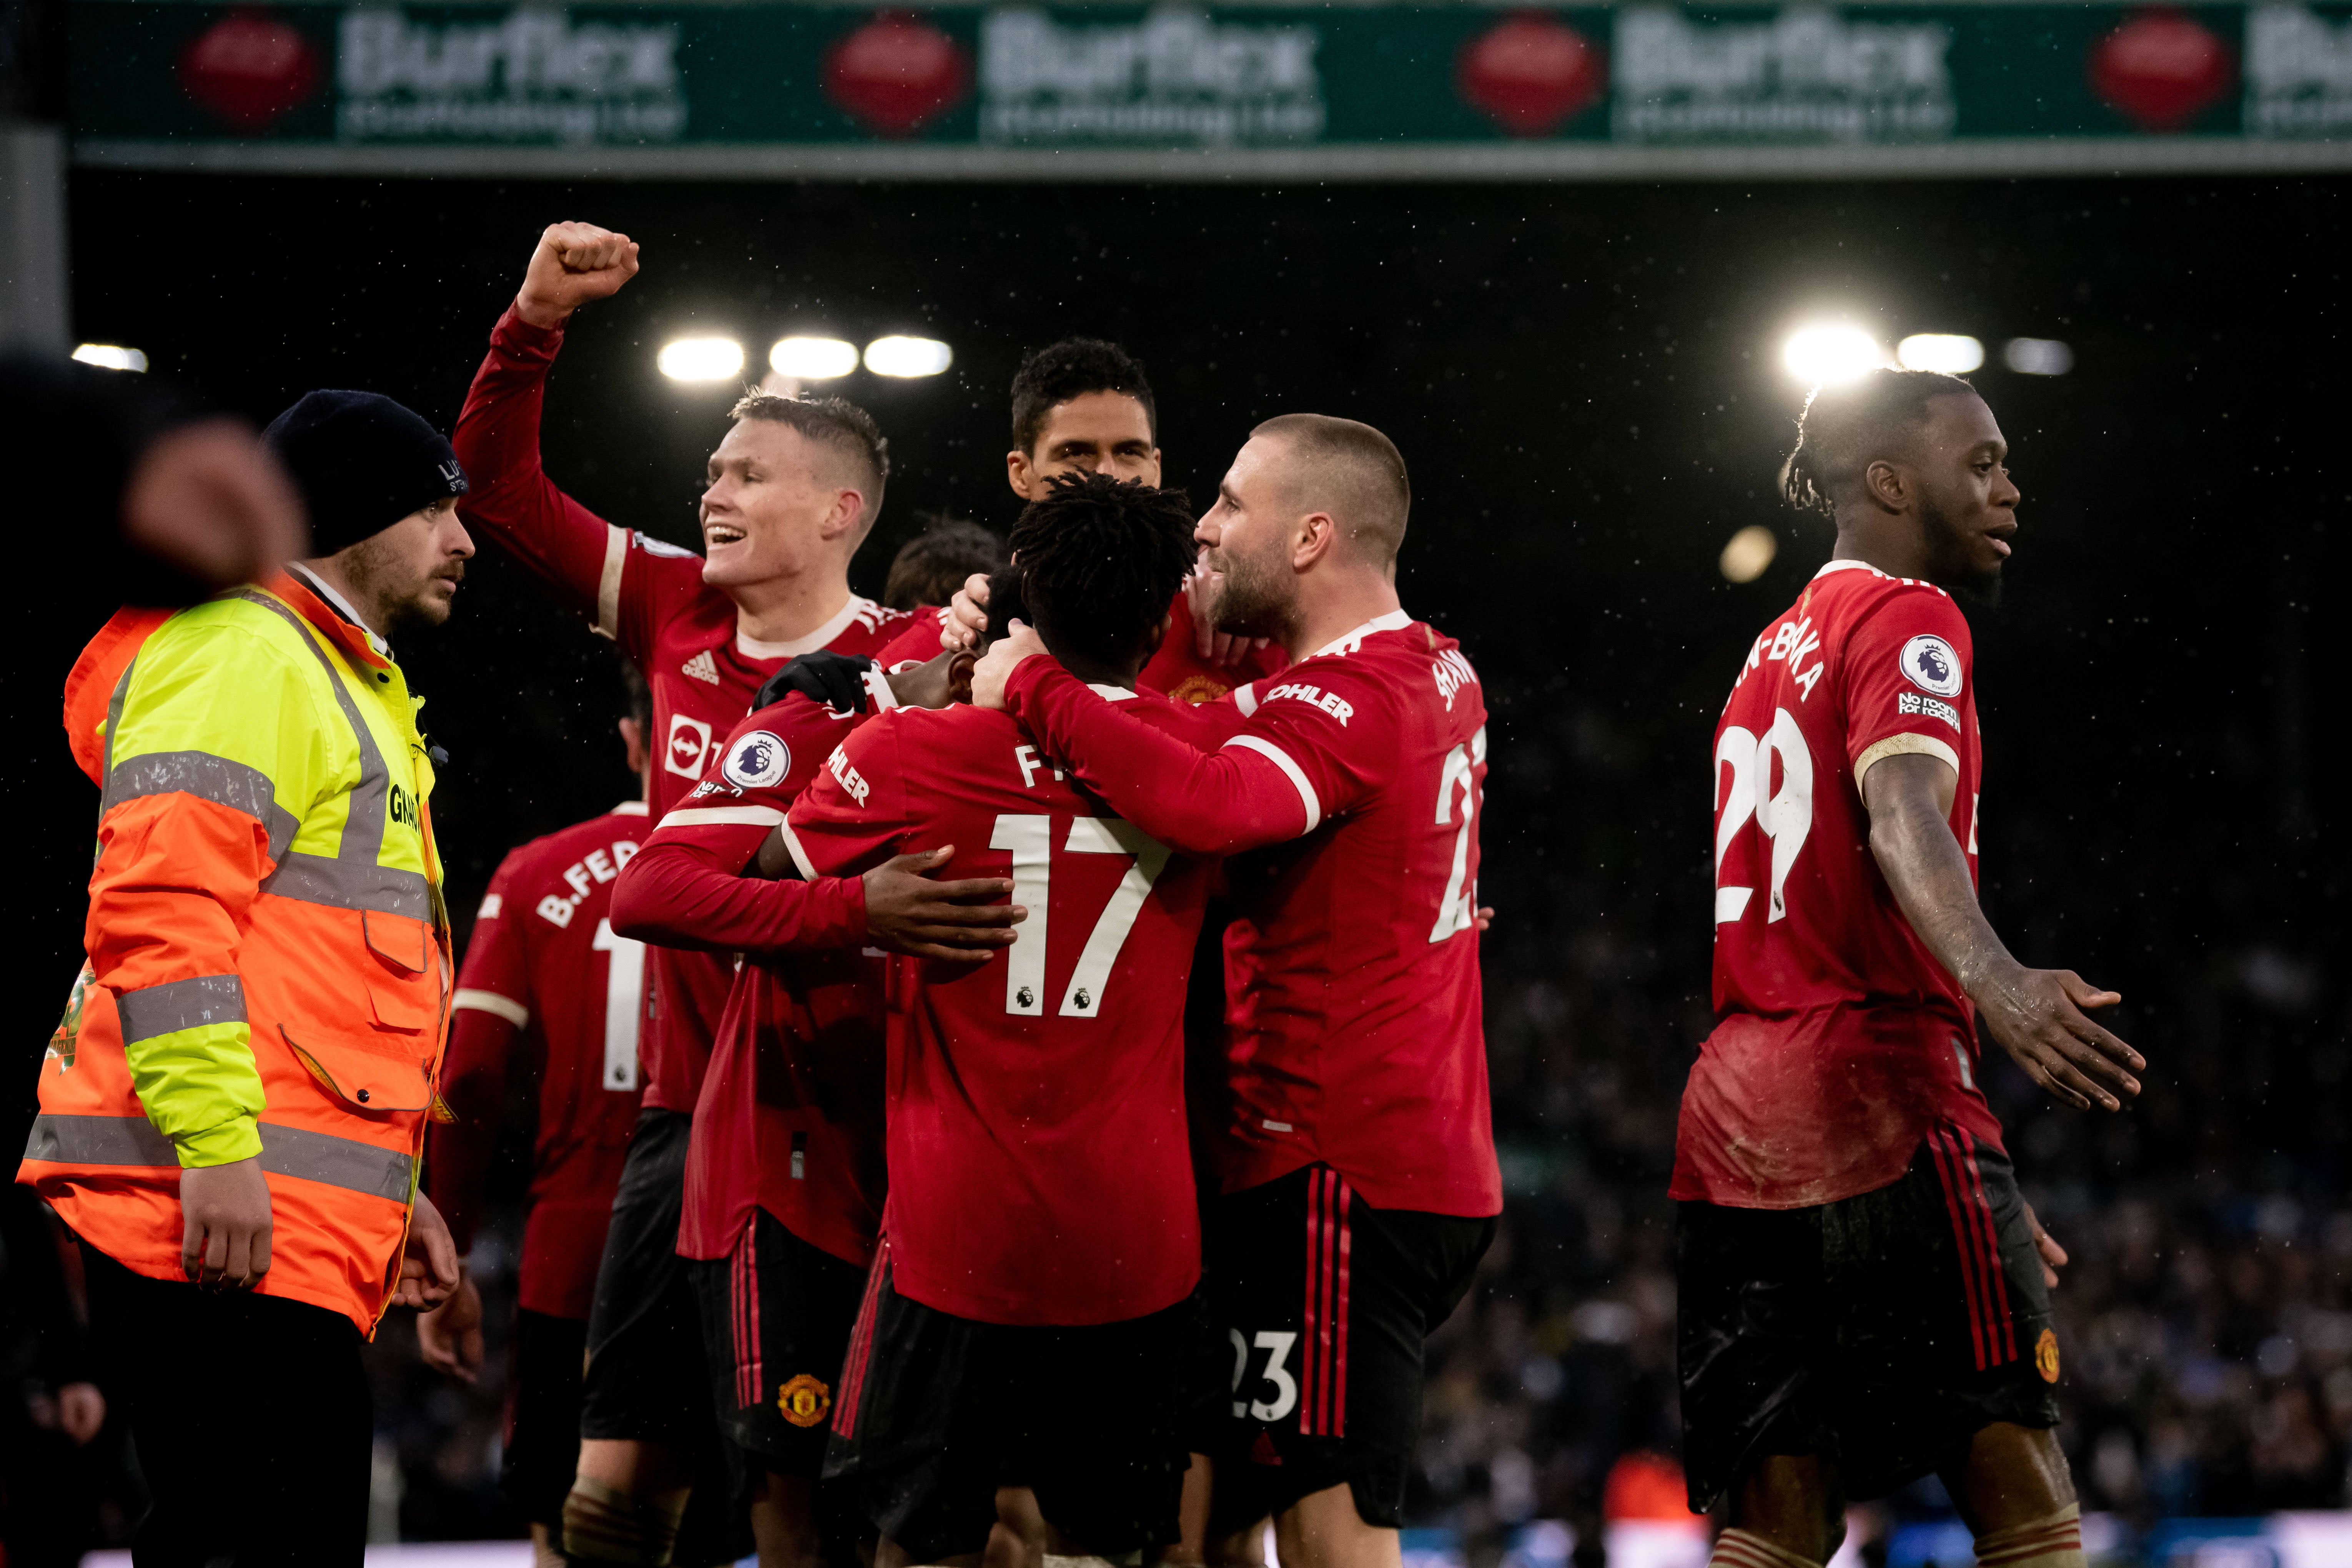 A relieved Manchester United team after the win